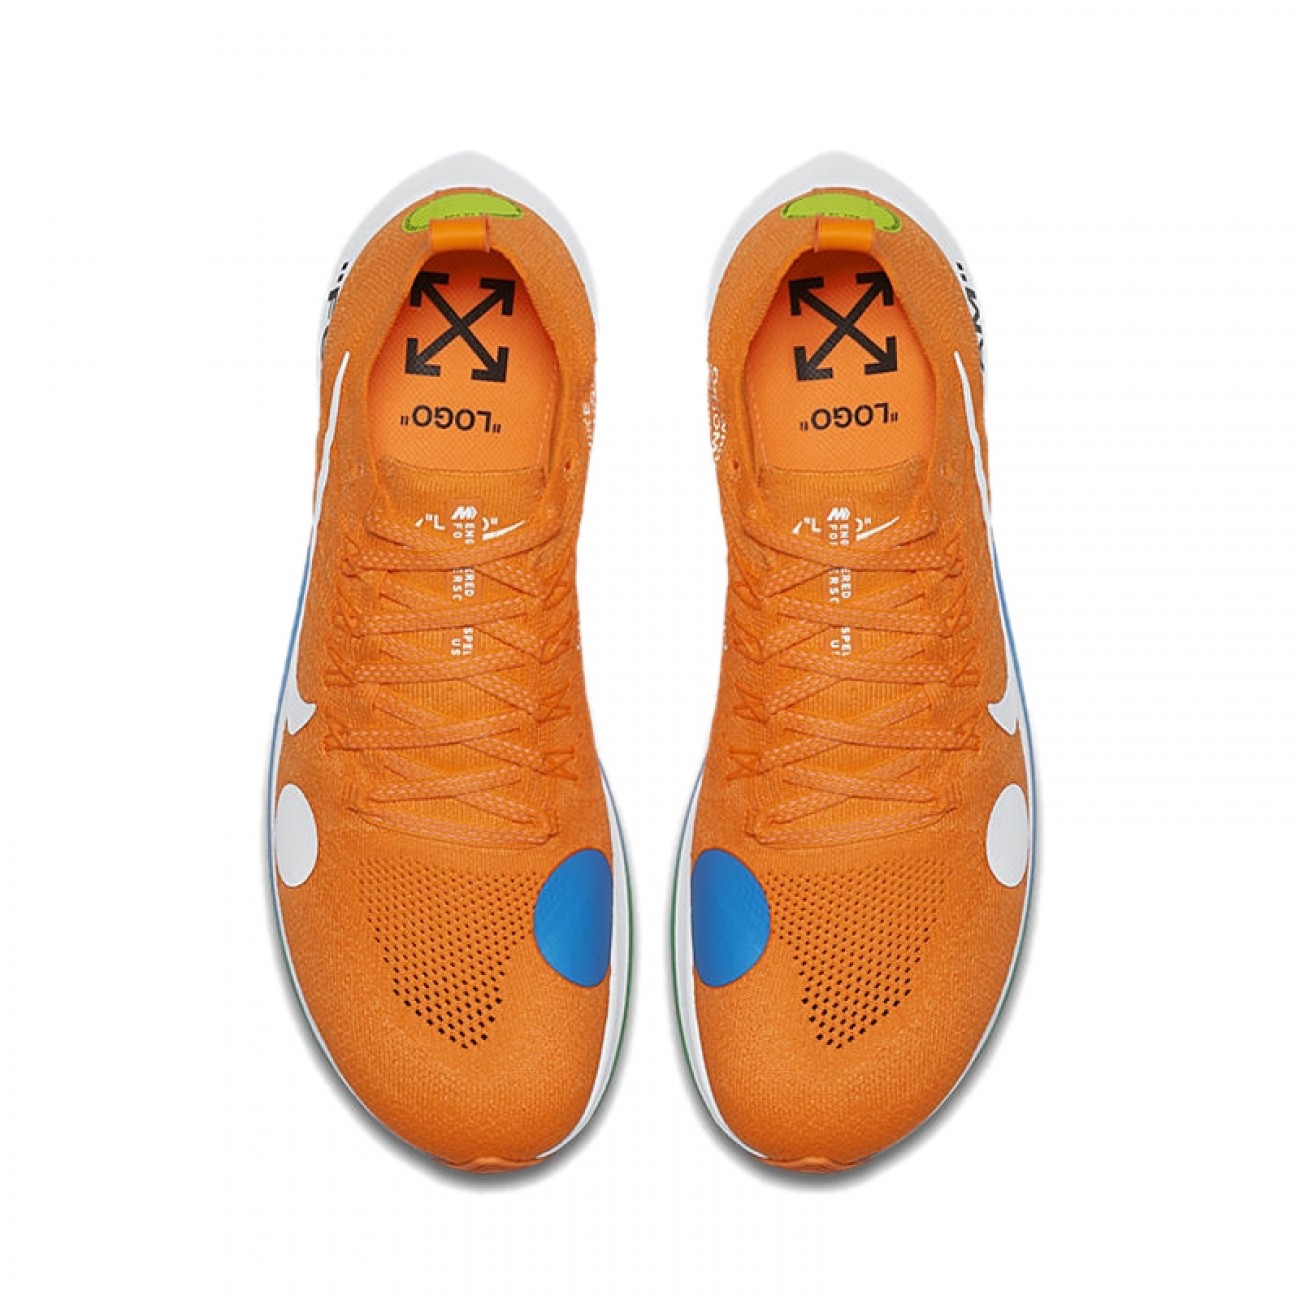 Off-White x Nike Zoom Fly Mercurial Flyknit Orange World Cup 2018 AO2115-800